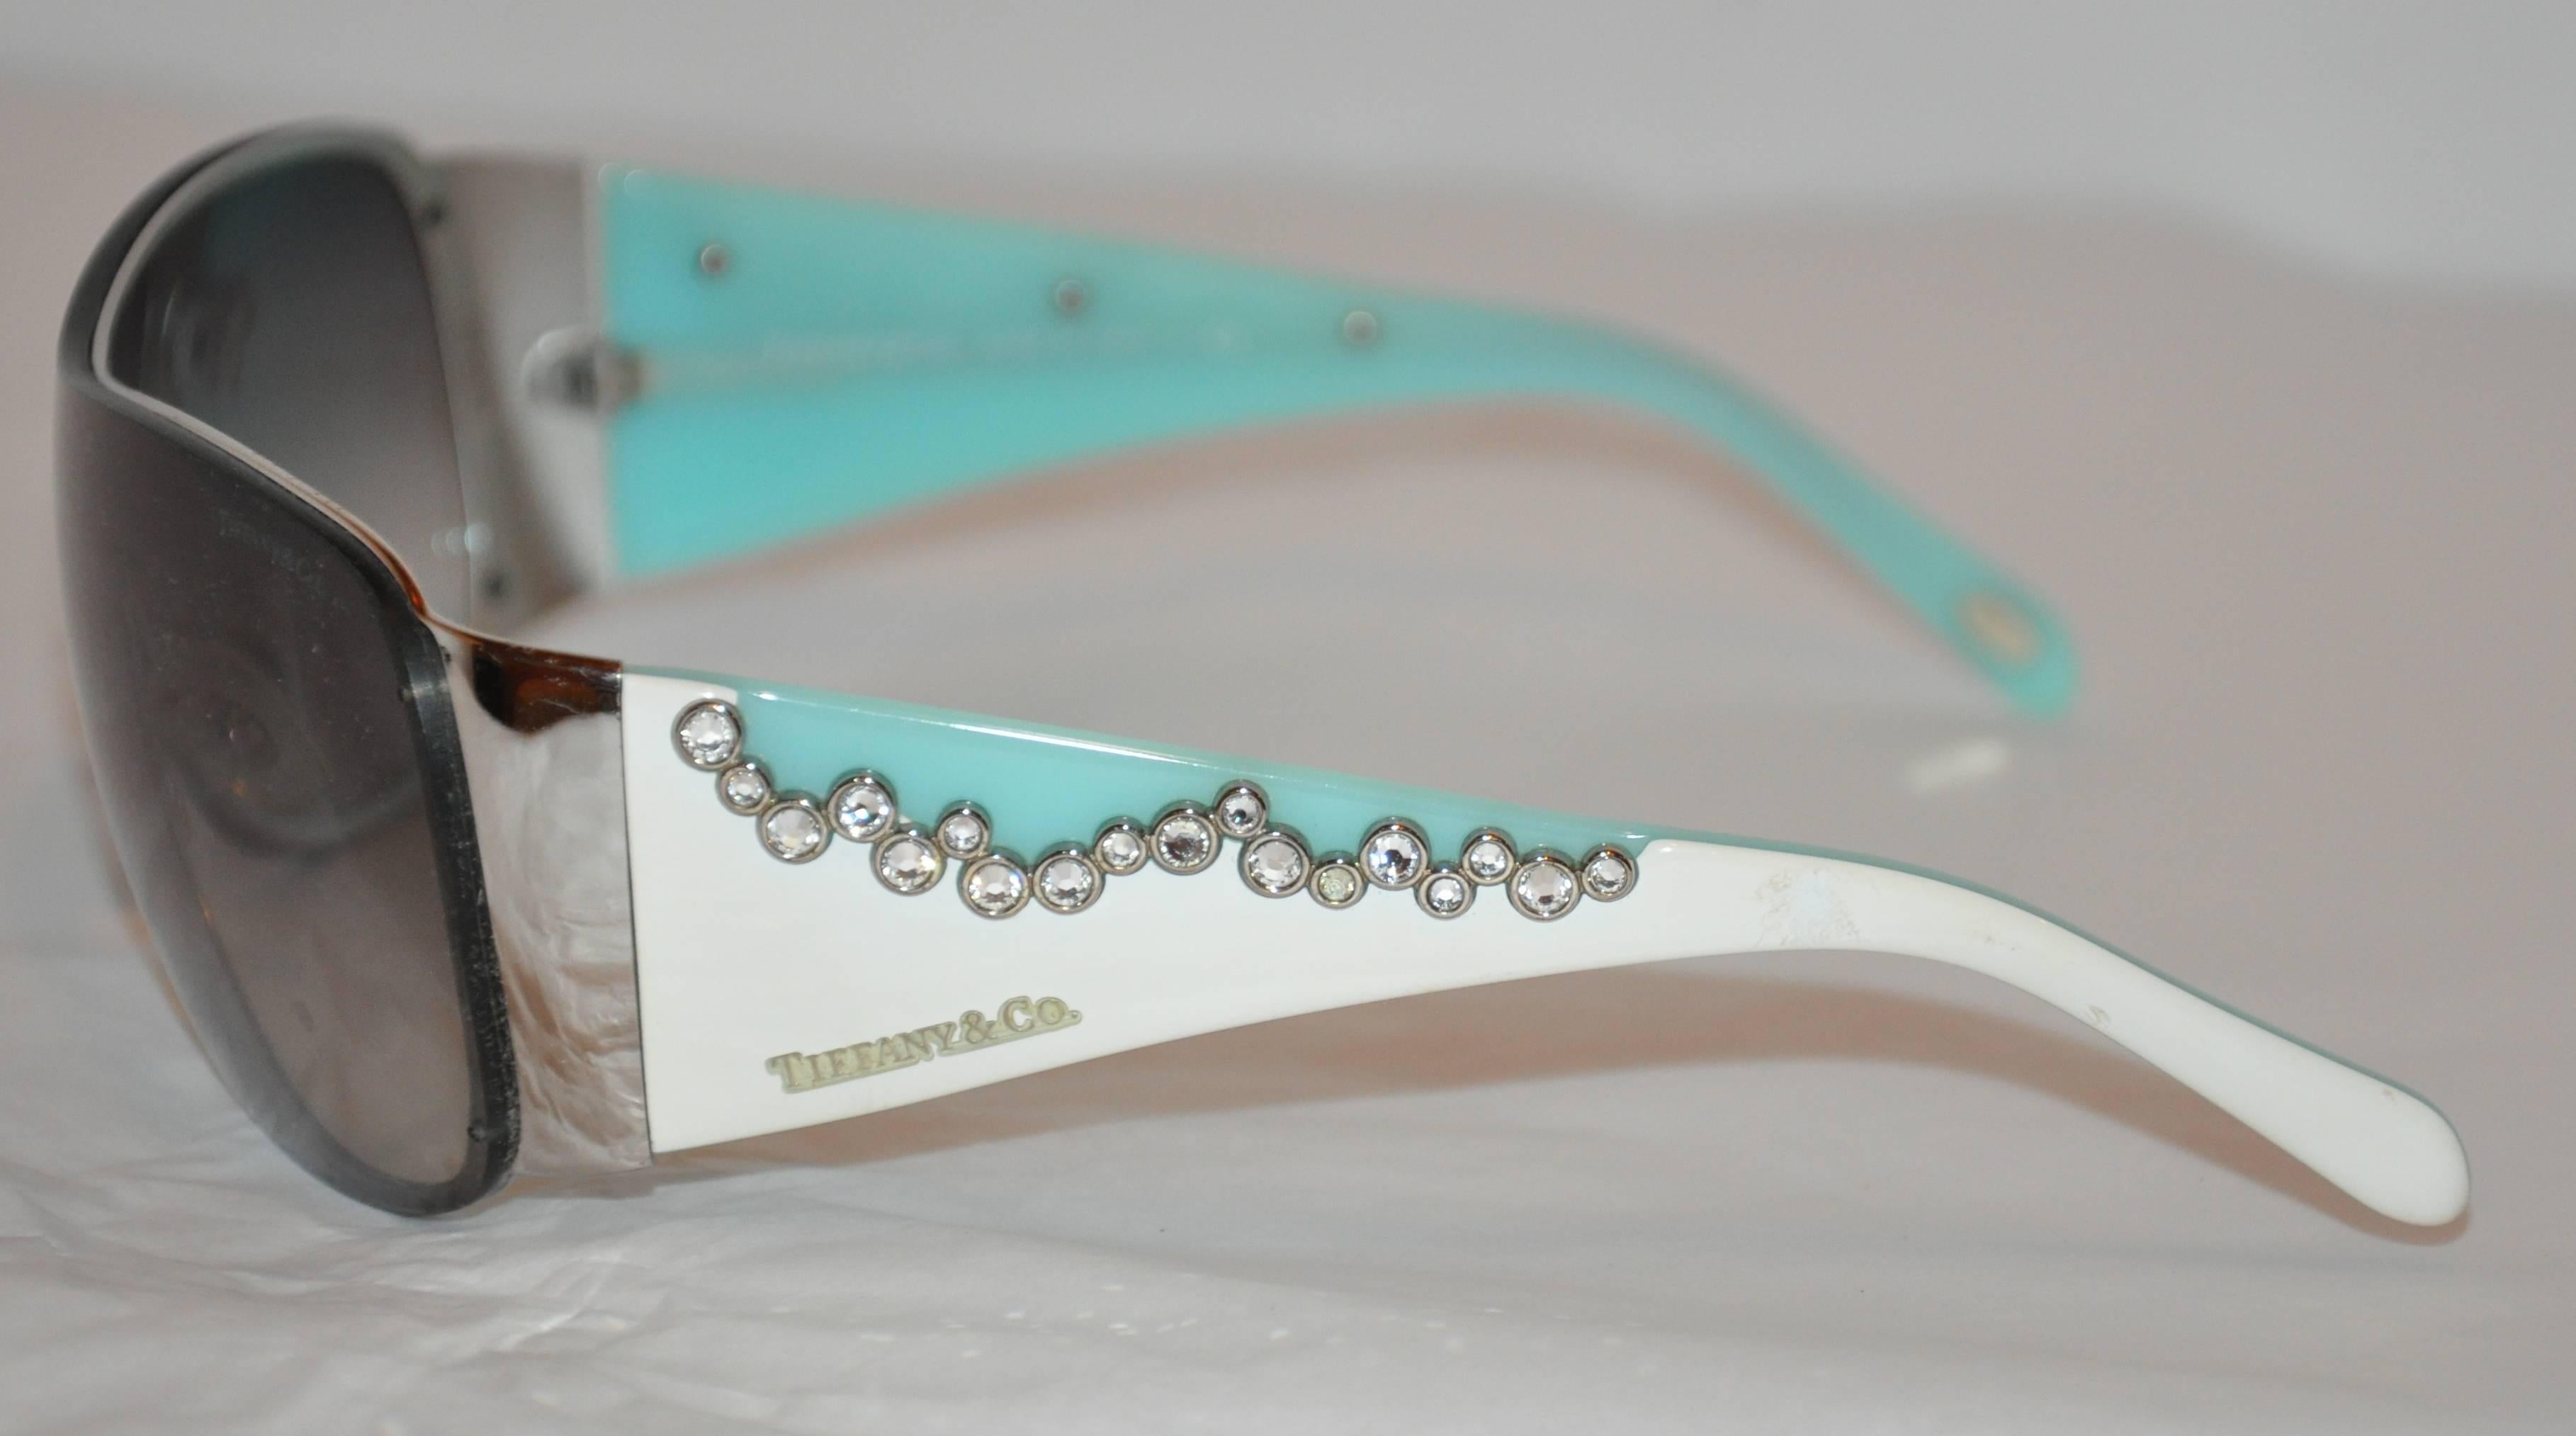           Tiffany & Co. thick lucite in their signature turquoise shade combined with white lucite and accented with detailed multi-rhinestones set in silver hardware settings on both arms of these wonderful sunglasses. The front measures 5 1/2